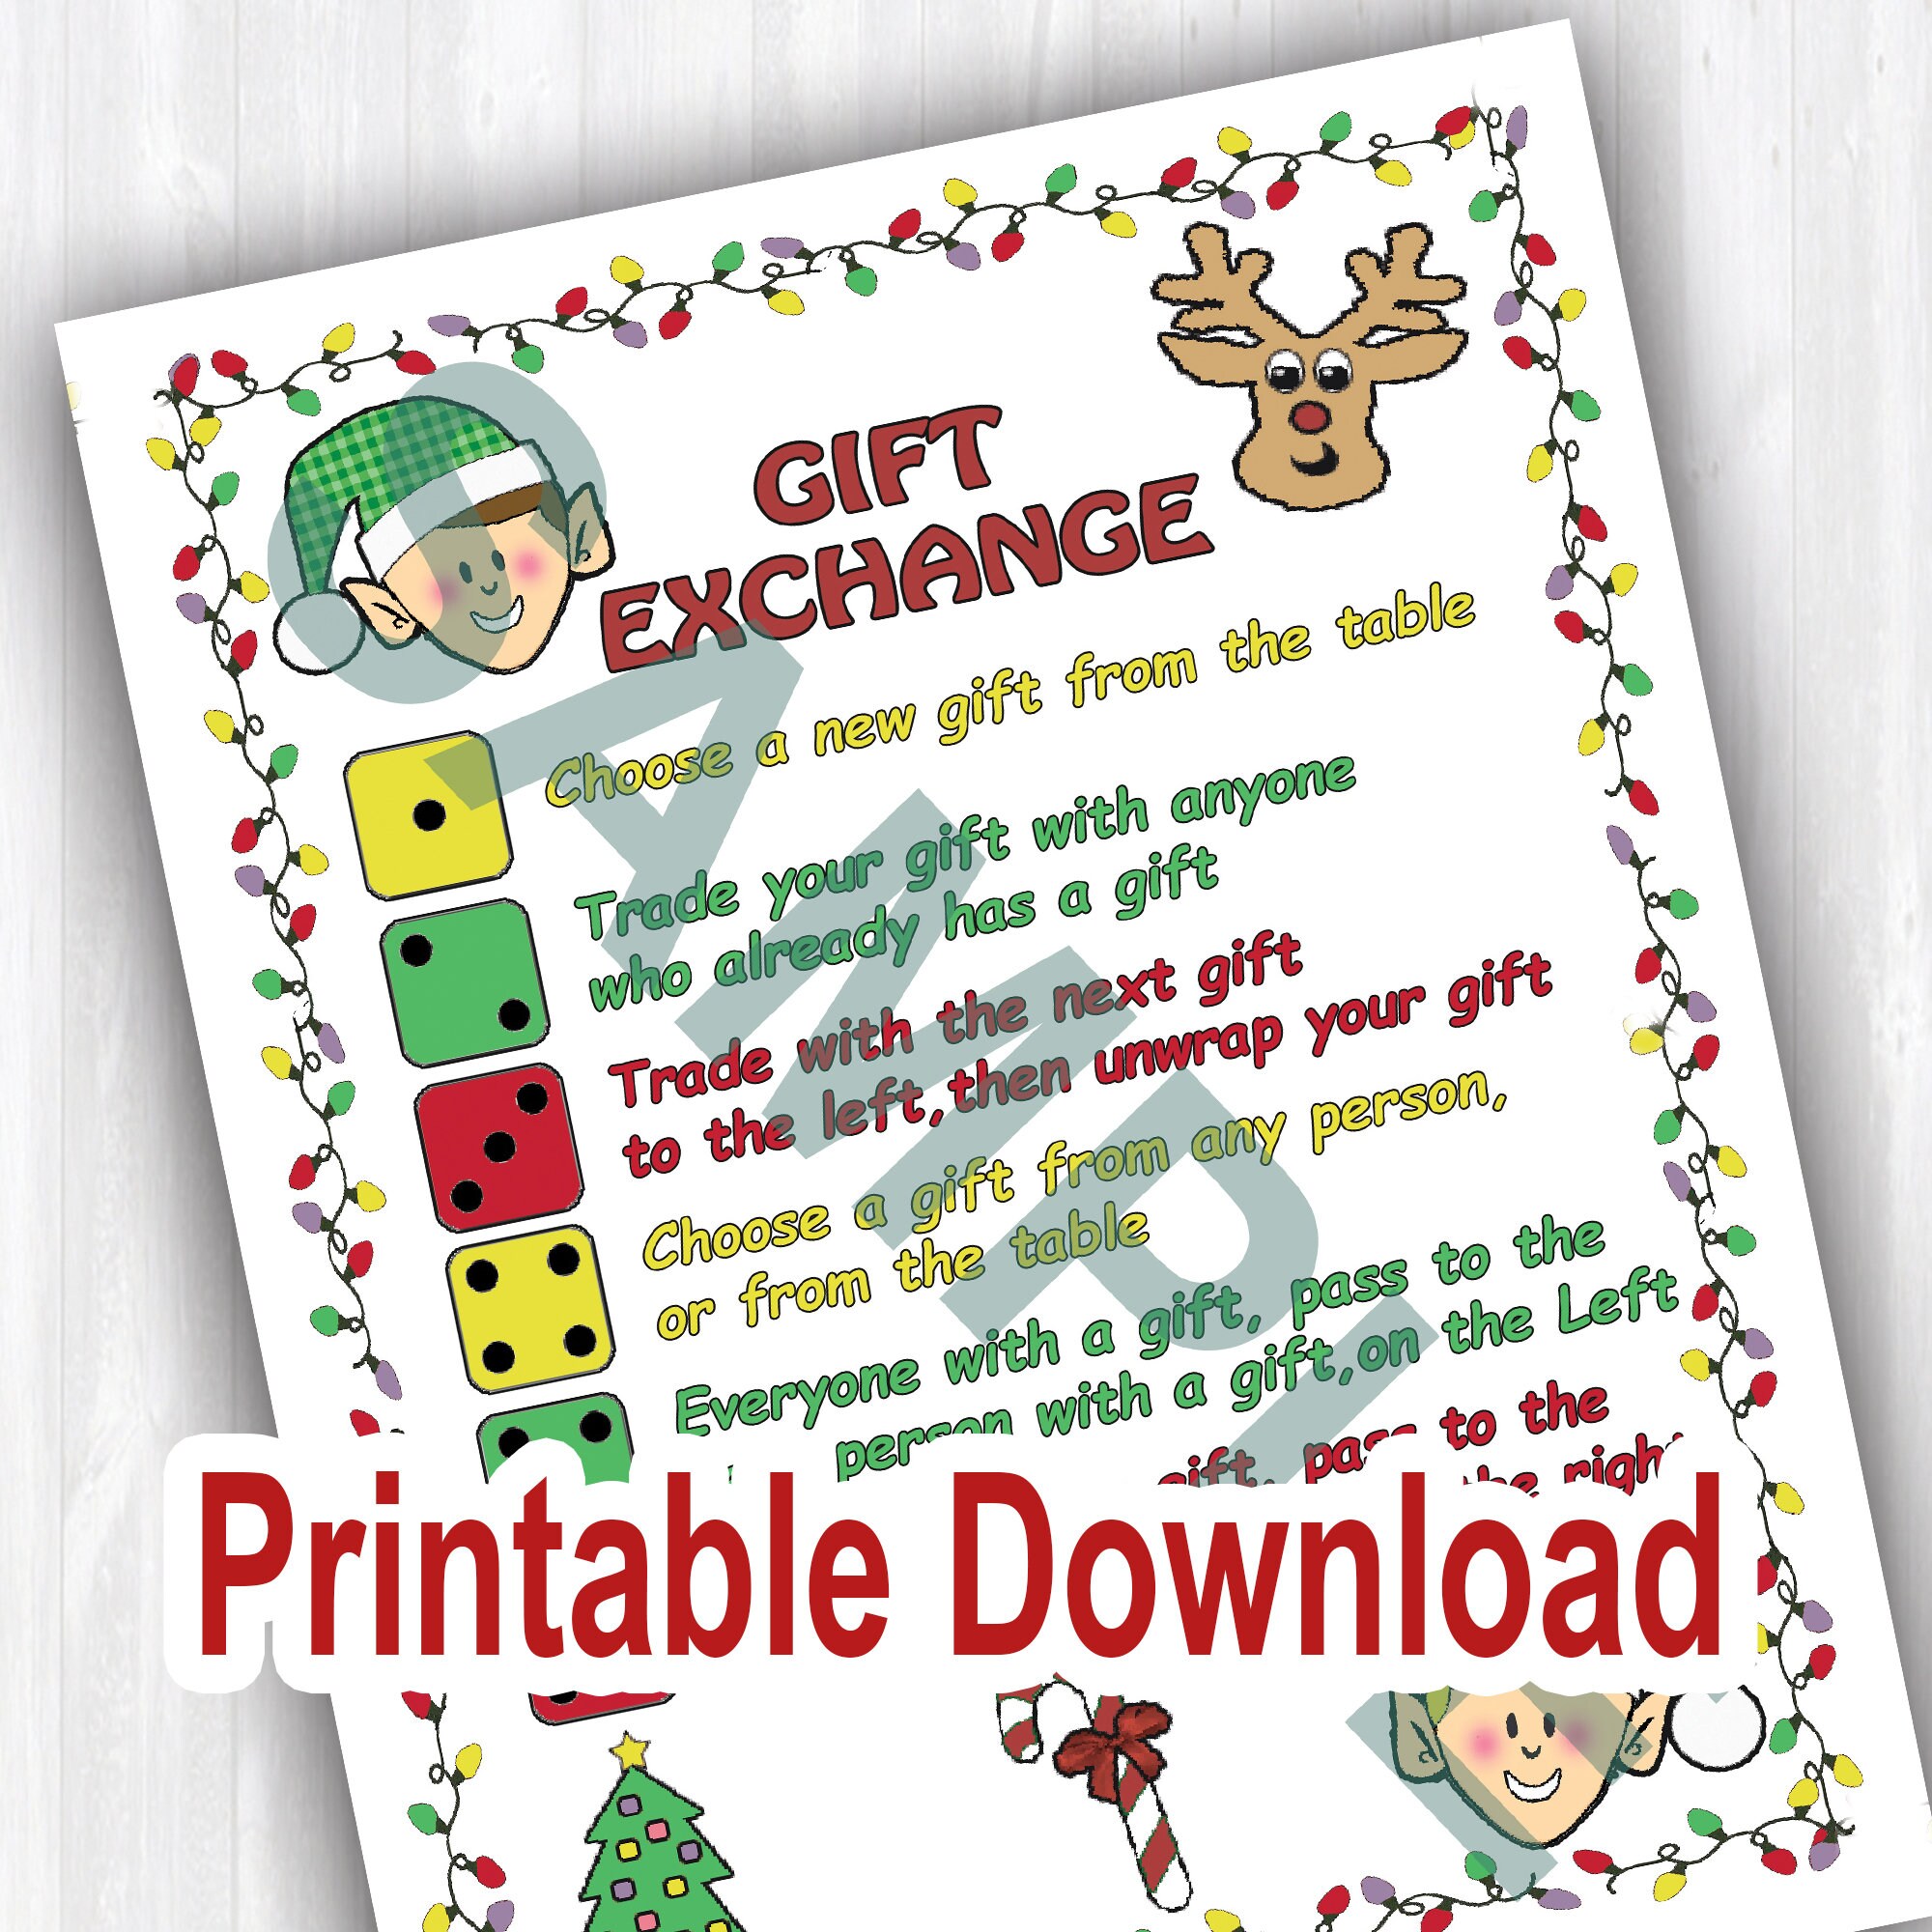 Christmas Party Ideas For Teens - 10+ of the Best Gift Exchange Games   Christmas gift exchange games, Gift exchange games, Holiday gift exchange